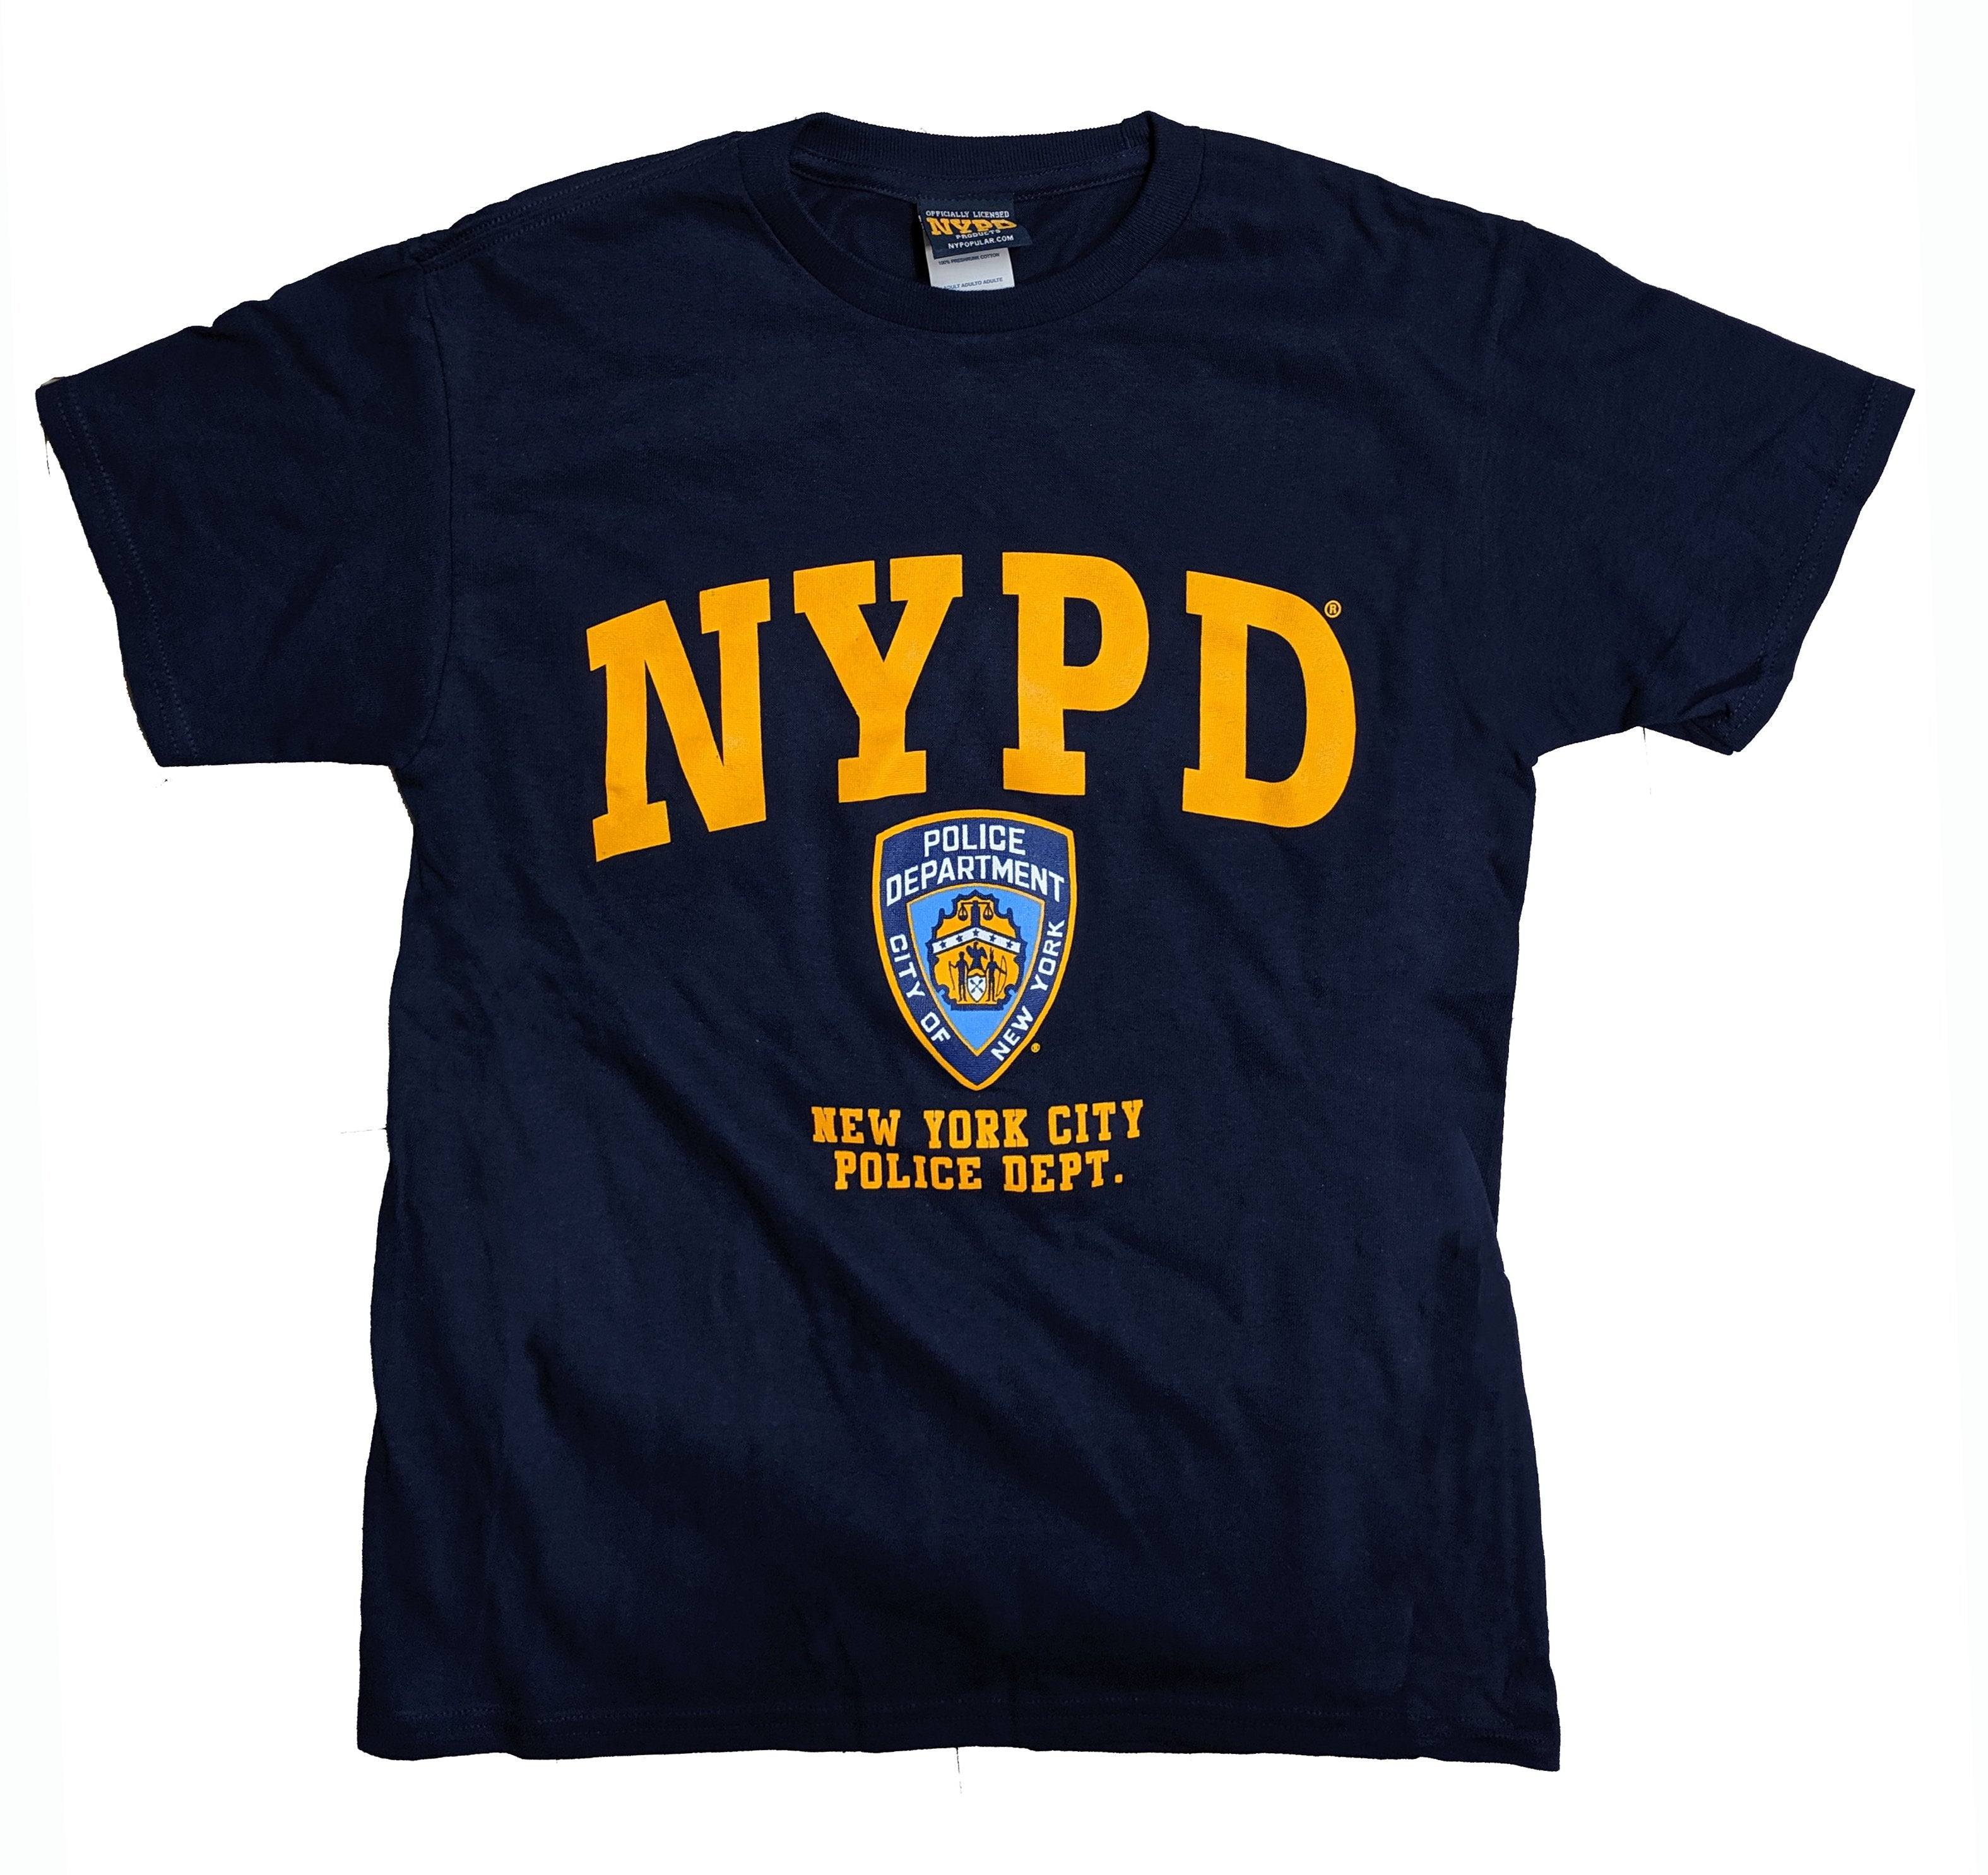 Men's NYPD Tee Official T-Shirt (Navy/Gold, Letters & Badge)